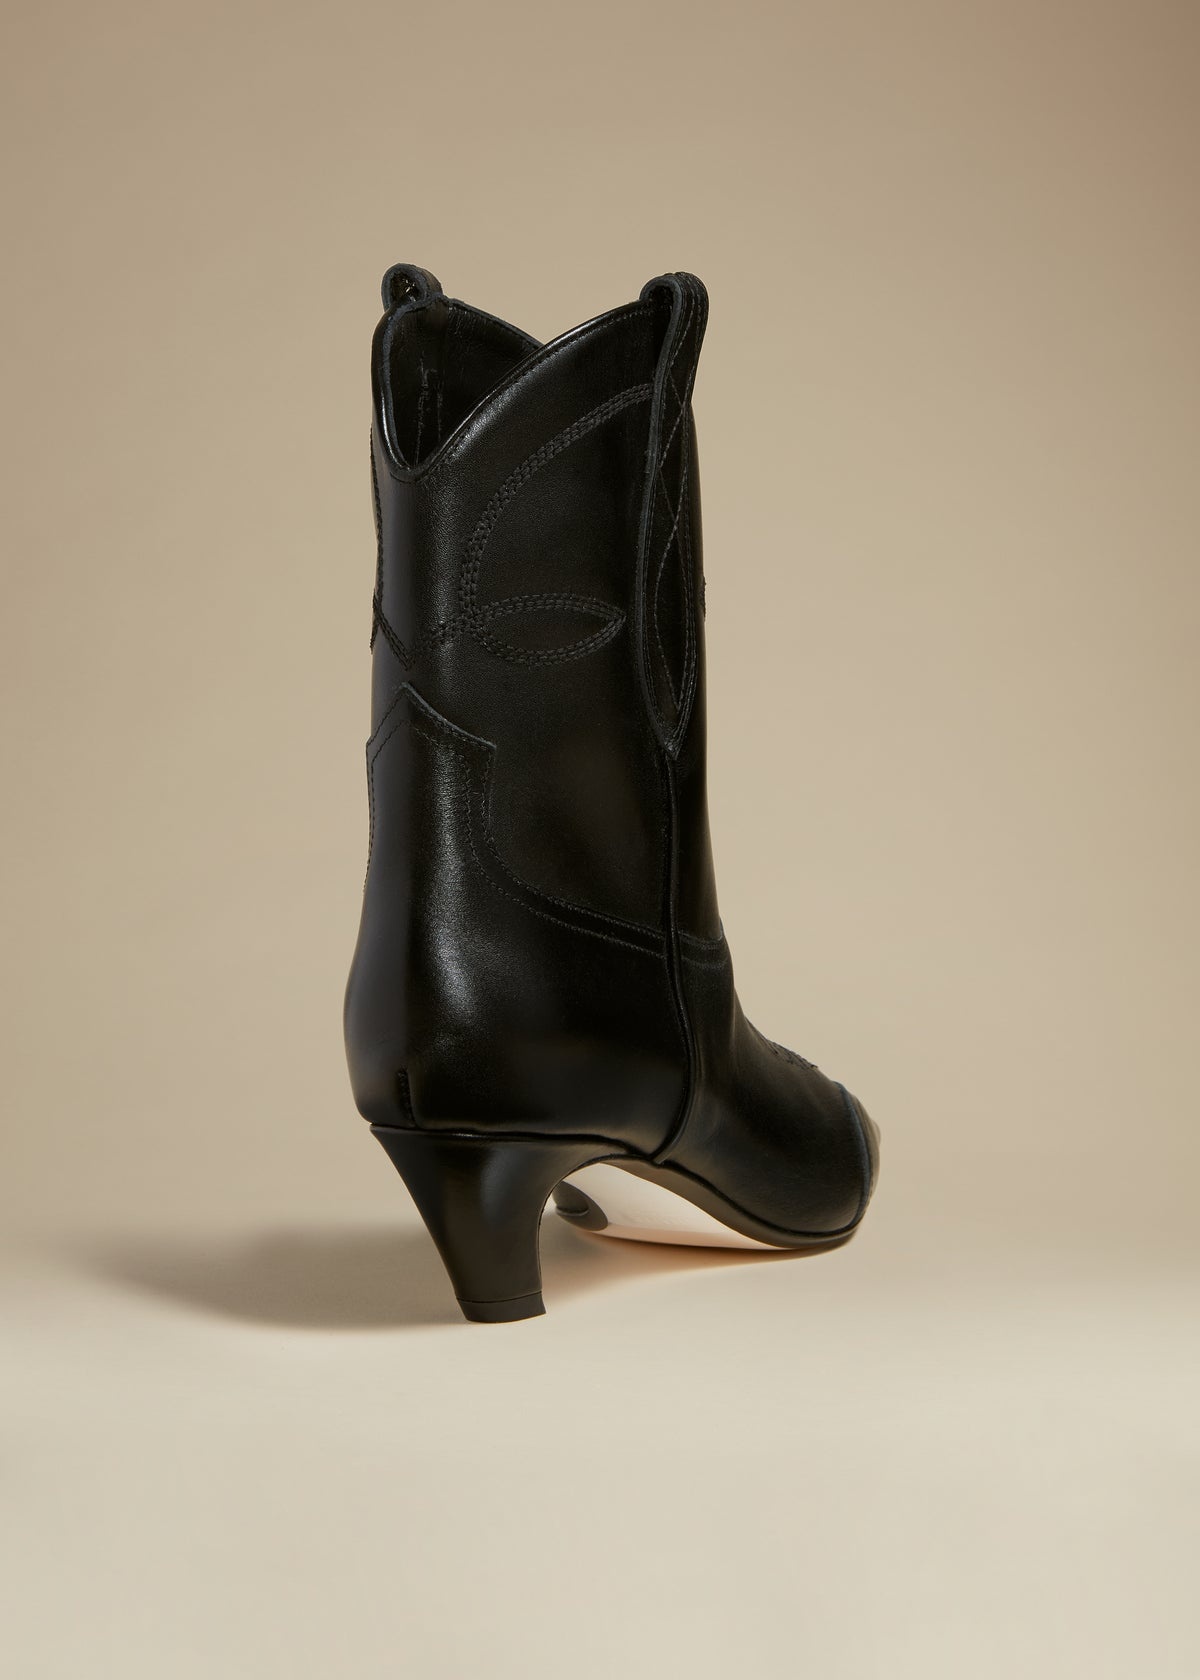 The Dallas Ankle Boot in Black Leather - 4